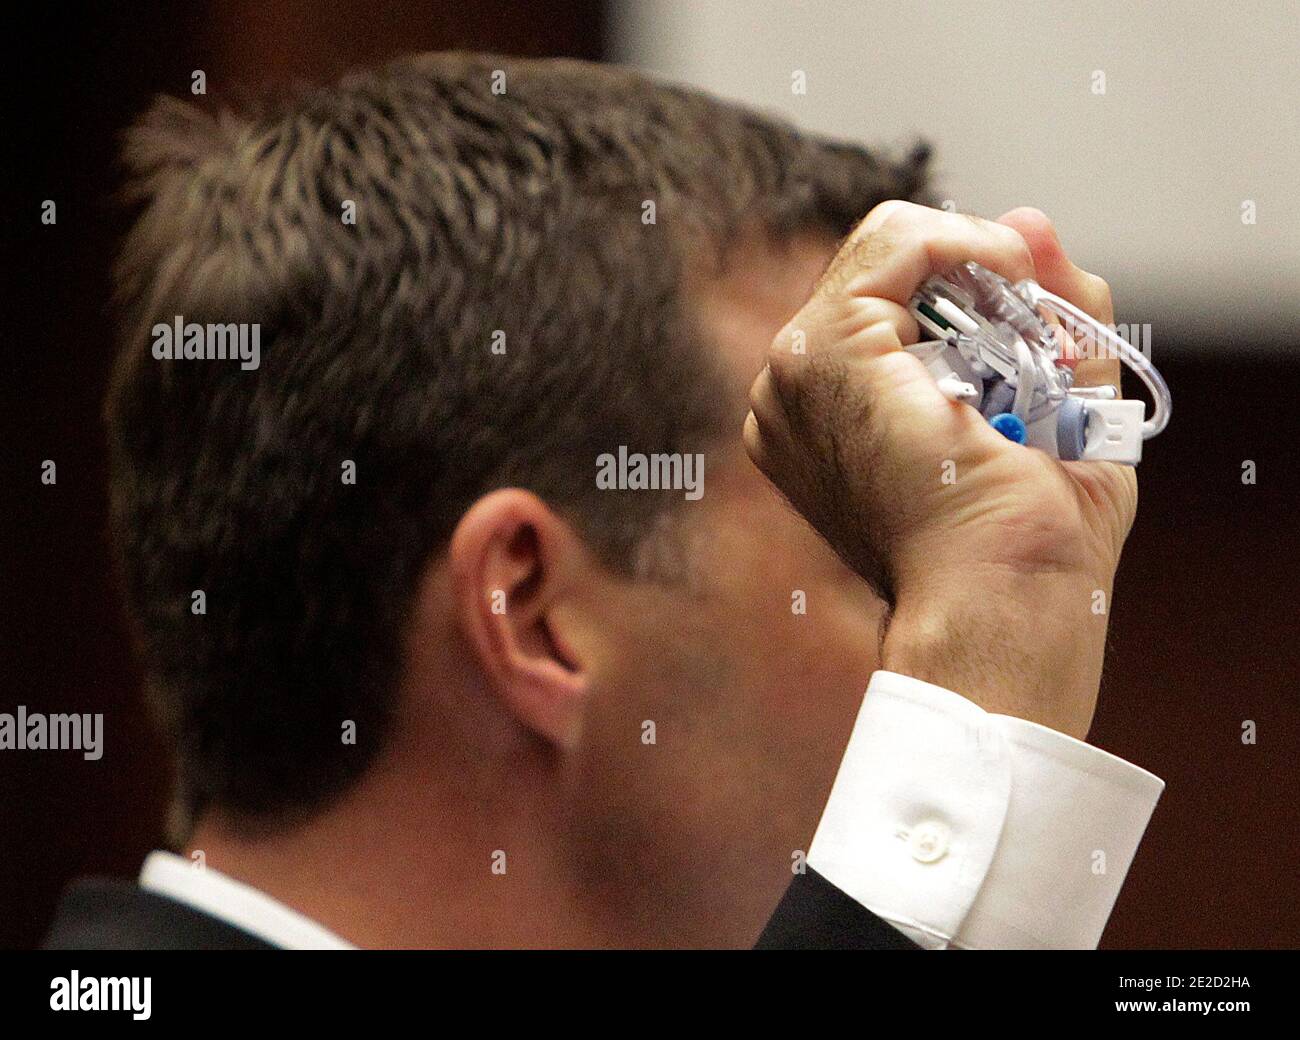 Deputy district attorney David Walgren holds an intravenous drip tube as he examines anesthesiology expert Dr. Steven Shafer during Dr. Conrad Murray's involuntary manslaughter trial in Los Angeles on October 20, 2011. Murray has pleaded not guilty and faces four years in prison and the loss of his medical license if convicted of involuntary manslaughter in Michael Jackson's death. Photo by Reed Saxon/Pool/ABACAPRESS.COM Stock Photo